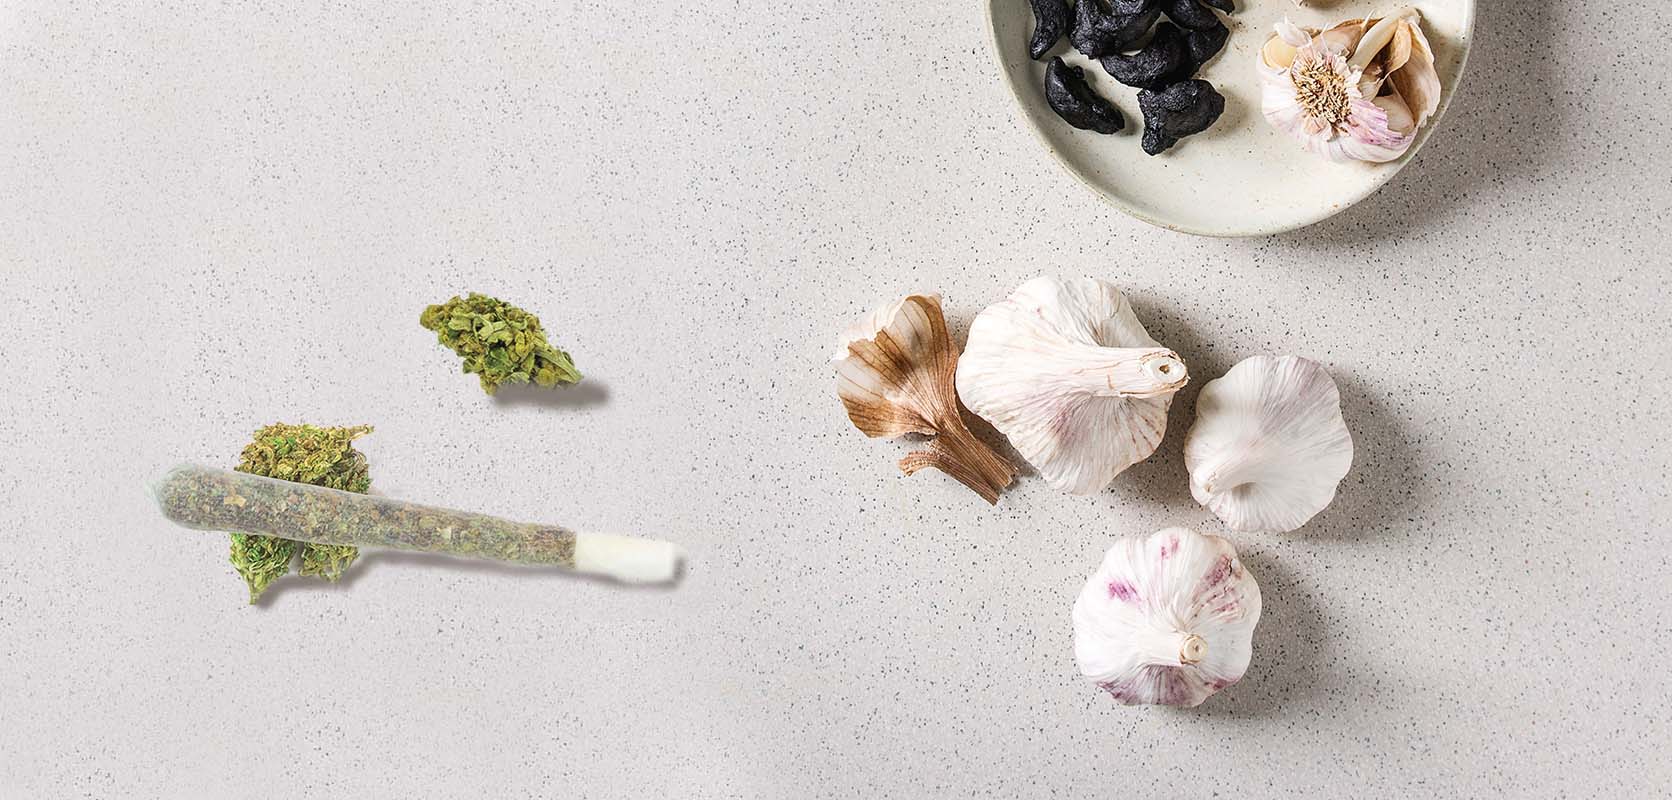 Garlic Cookies strain weed buds and pre-roll joint next to garlic cloves. Buying marijuana online and buy peyote in canada. pink candy strain, godfather og, fatso strain, sugar cookies strain.